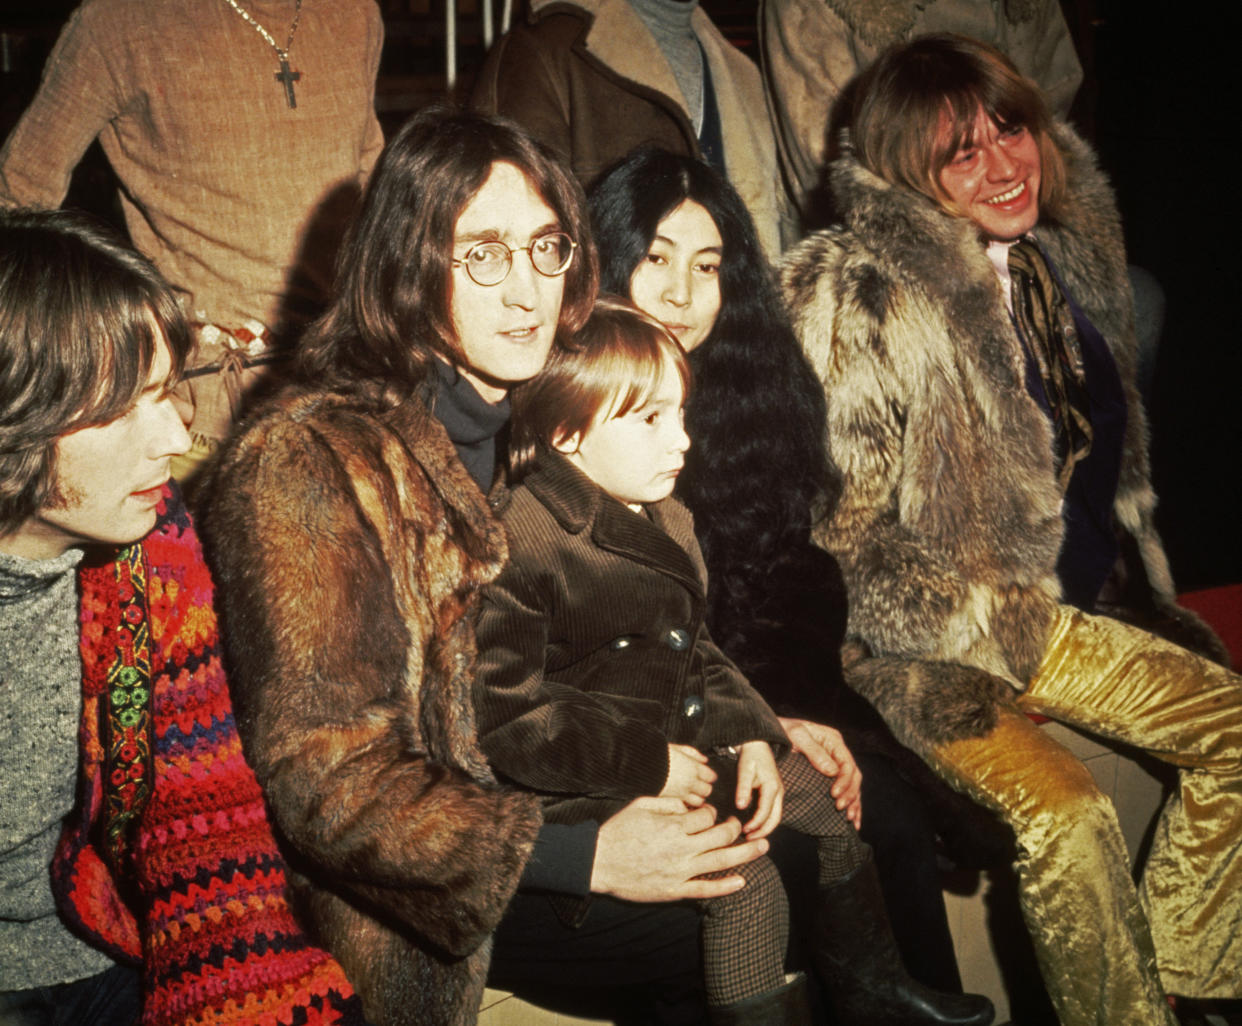 10th December 1968:  British musicians Eric Clapton, John Lennon (1940 - 1980) - with his wife, artist Yoko Ono and his son Julian - and Brian Jones (1942 - 1969) pictured at a press conference at Internel Studios in Stonebridge Park, Wembley, for the Rolling Stones' Rock & Roll Circus project.  (Photo by Hulton Archive/Getty Images)